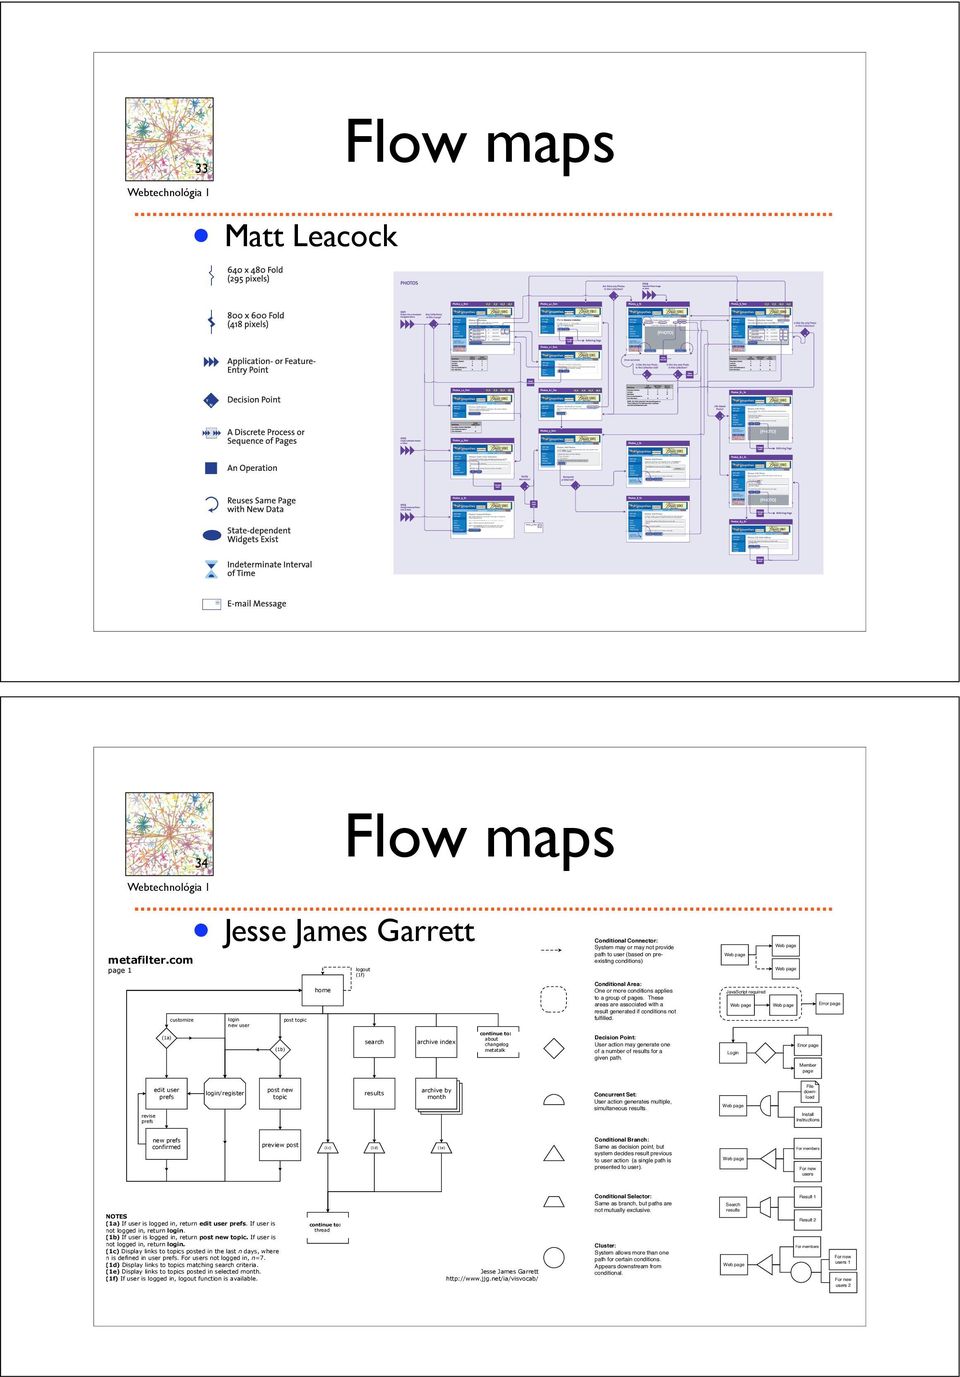 t m a BYALBERTU\SZLO BARABASI ANDERICBONABEAU Flow maps 34 IA Visual Vocabulary Cheat Sheet Conditional Elements THE INTERNET,mapped on the opposite page, is a scalefree network in that traces the